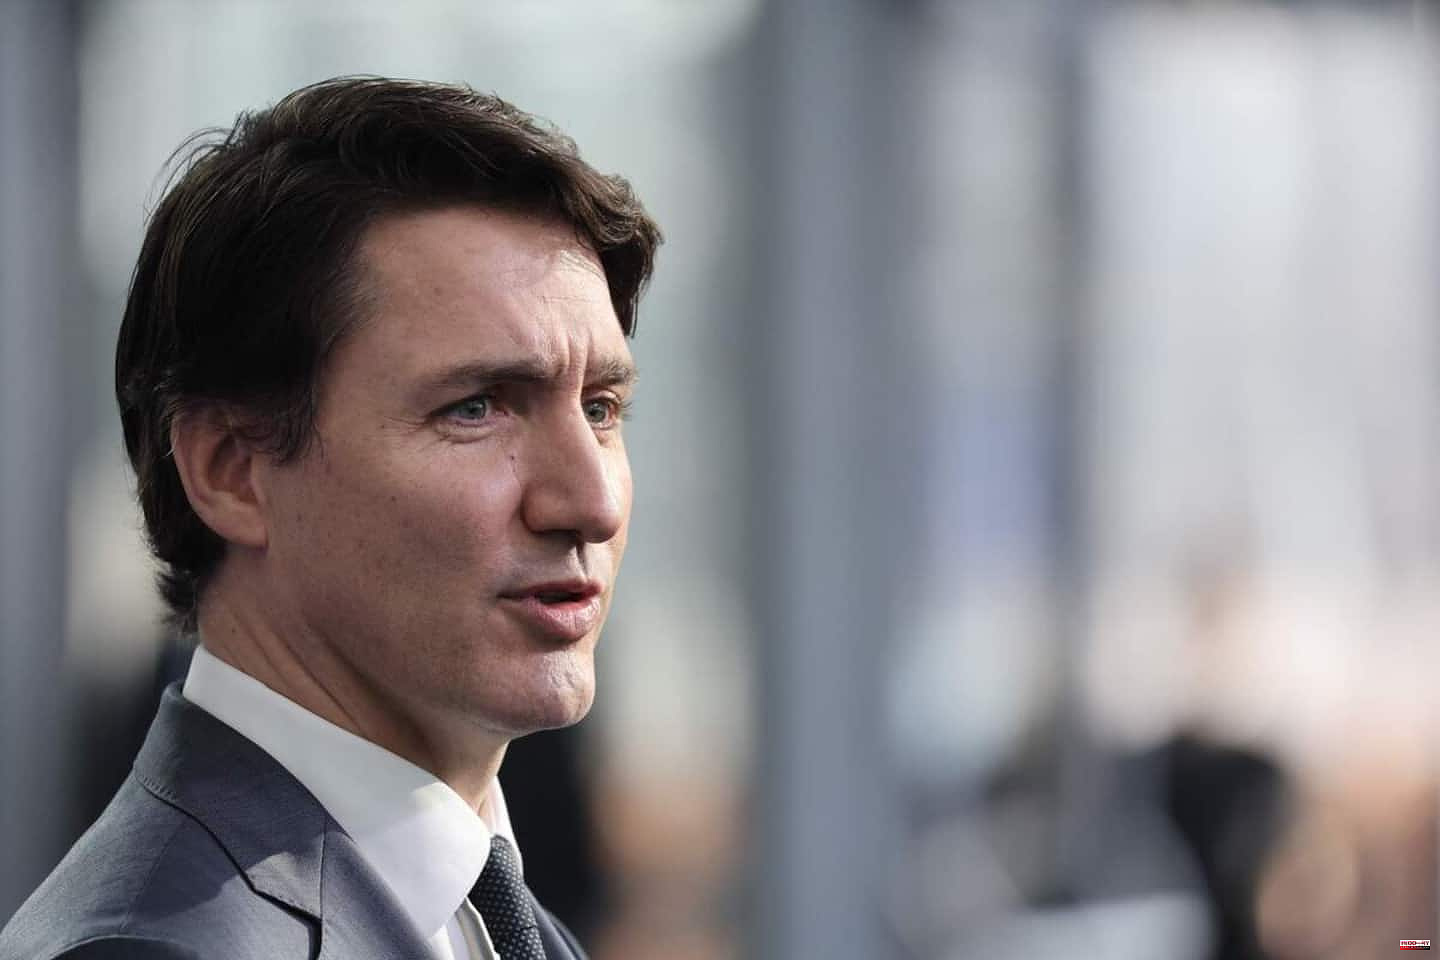 Immigration: Ottawa is working to reach francophone thresholds, assures Trudeau